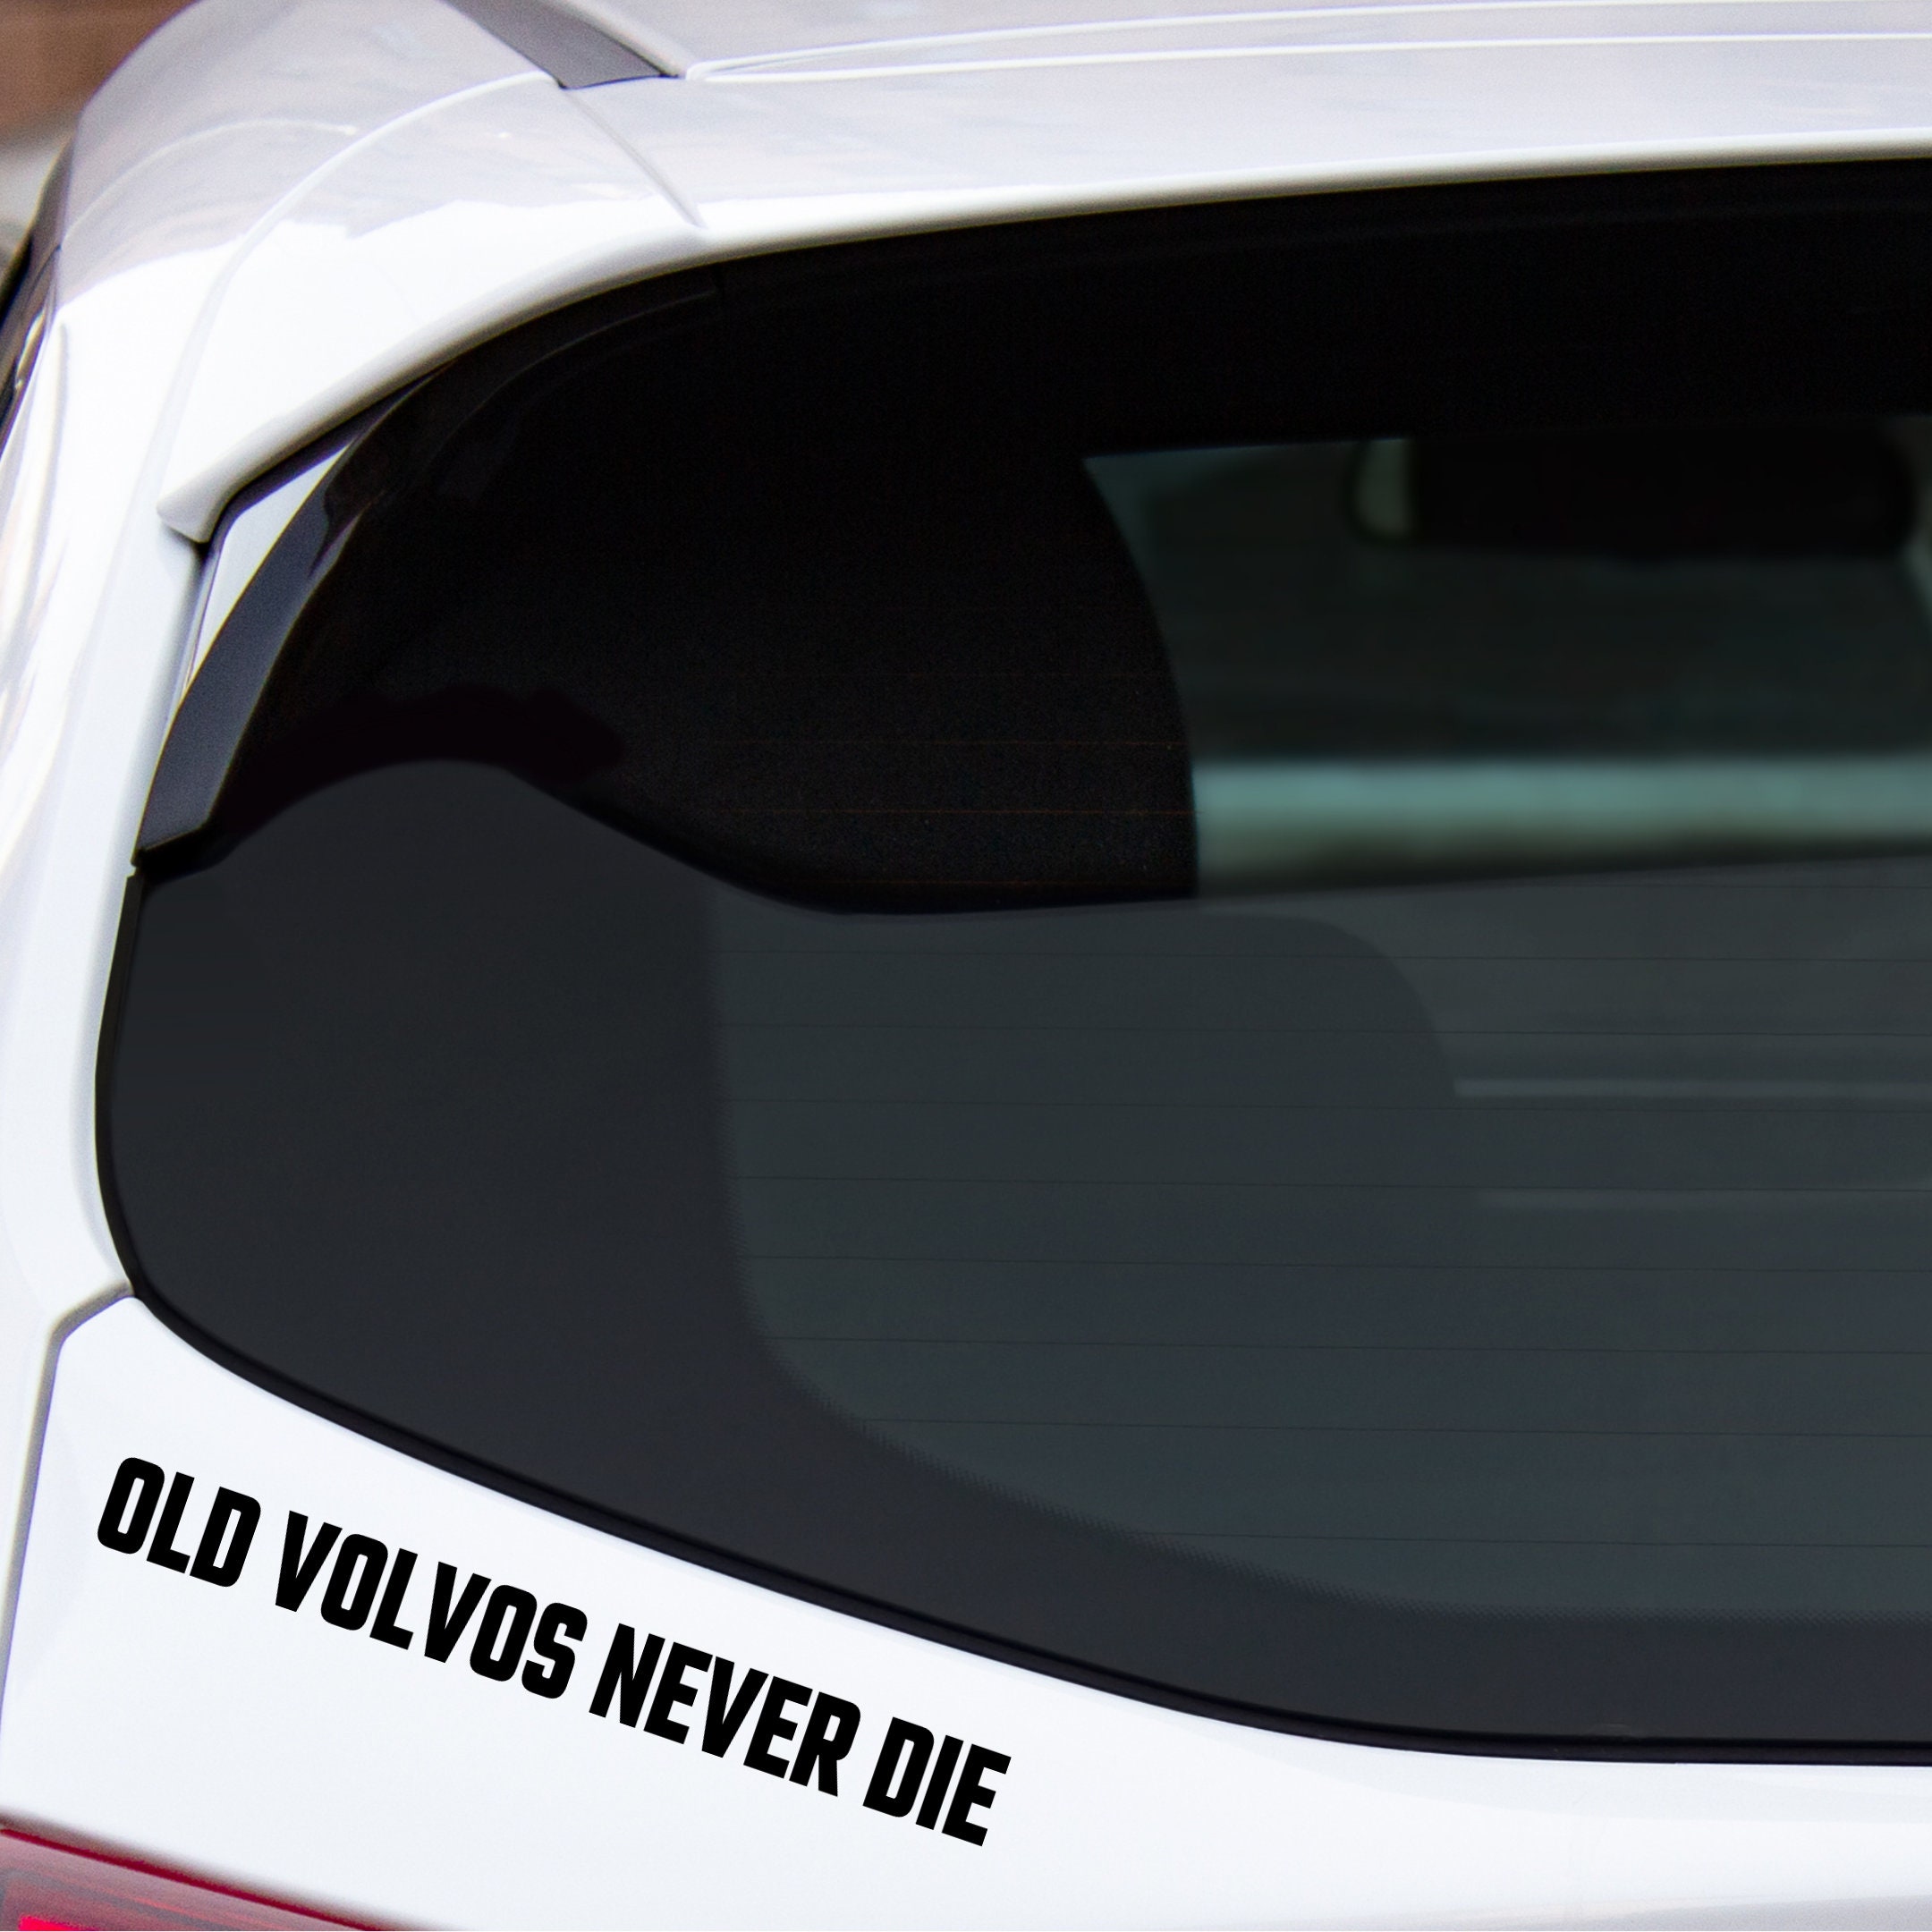 Old Volvos Never Die Vinyl Decal Volvo Funny Sticker Drift Rally Dub Stance Classic  Car Slap Swede Swedish the Volv 240 740 Wagen 